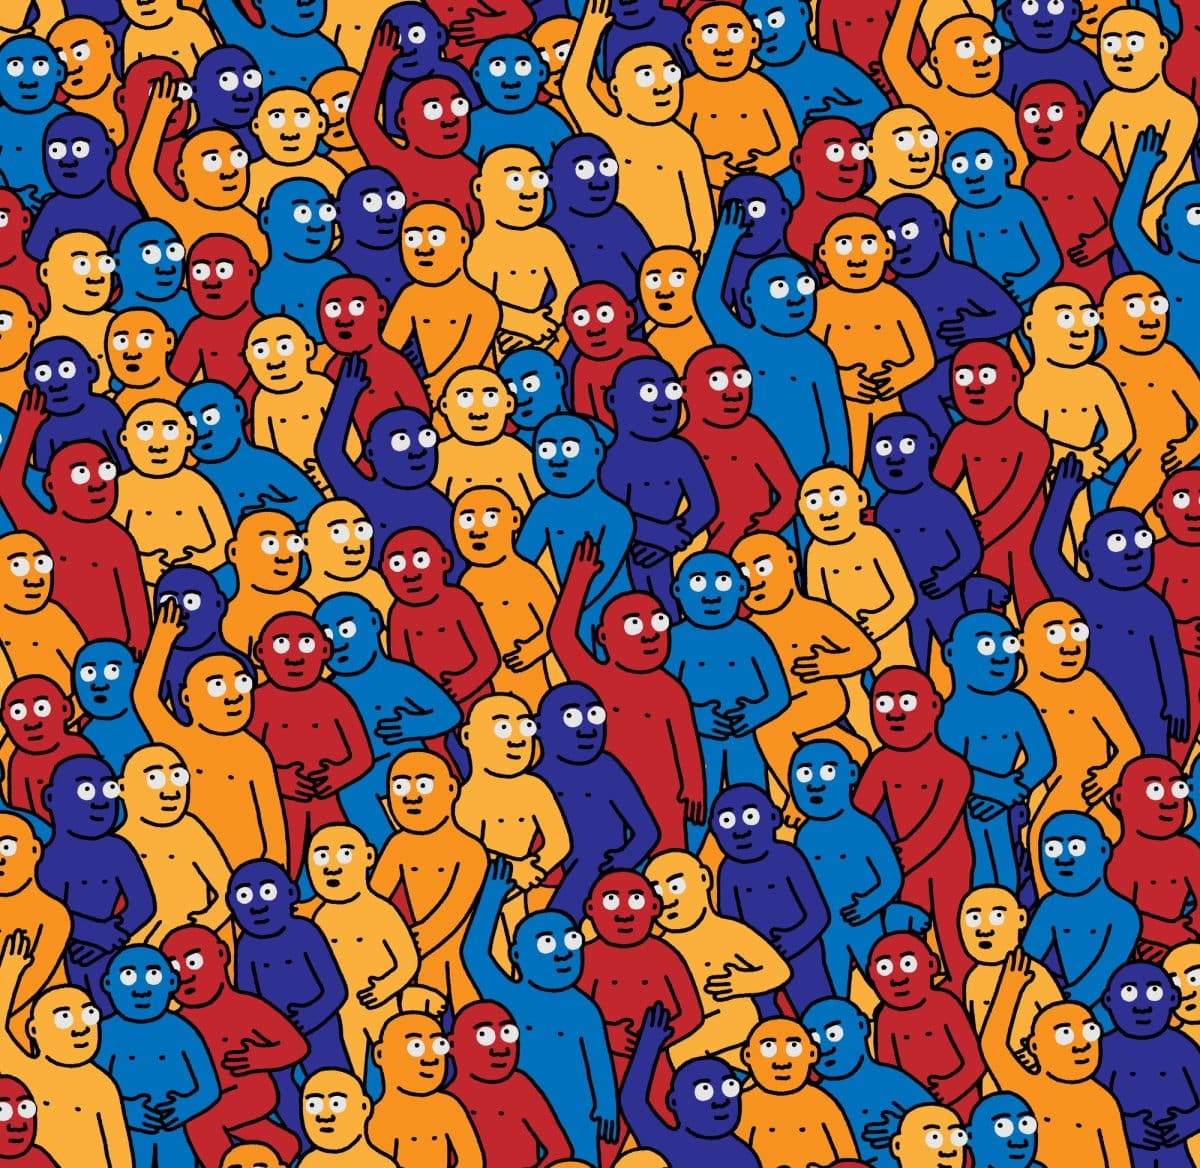 Crowds' artwork appears as human-like figures in different colors, celebrating the diversity of their unity.